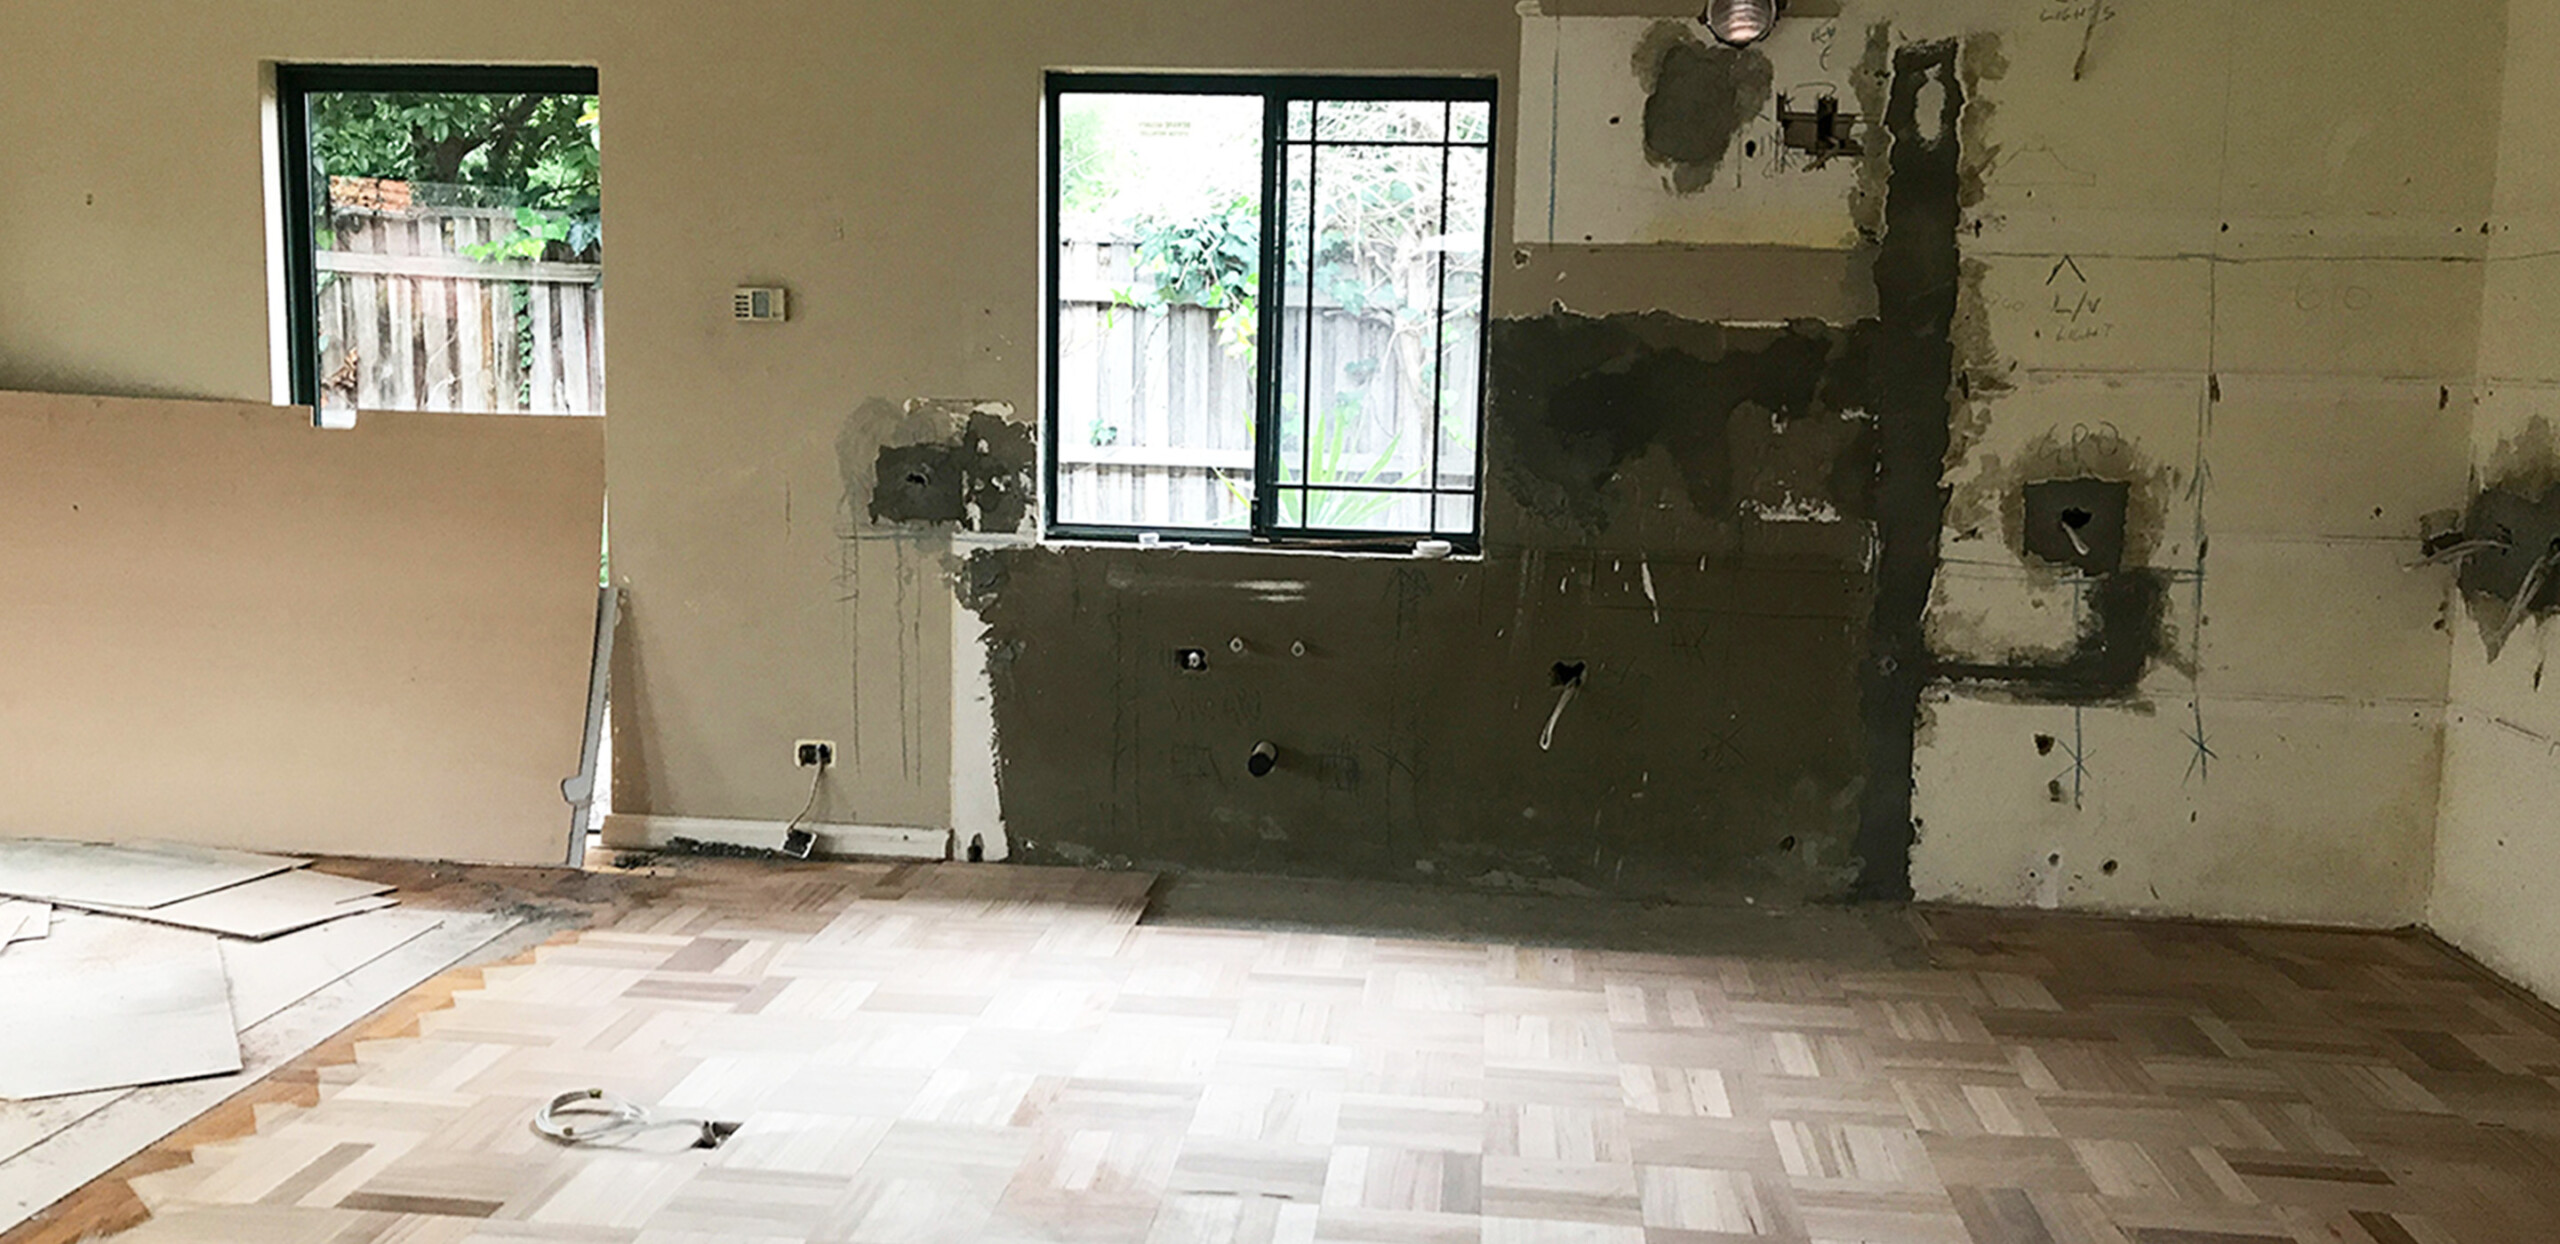 The old kitchen is pulled out, leaving a blank canvas with exposed electrical points and plumbing.